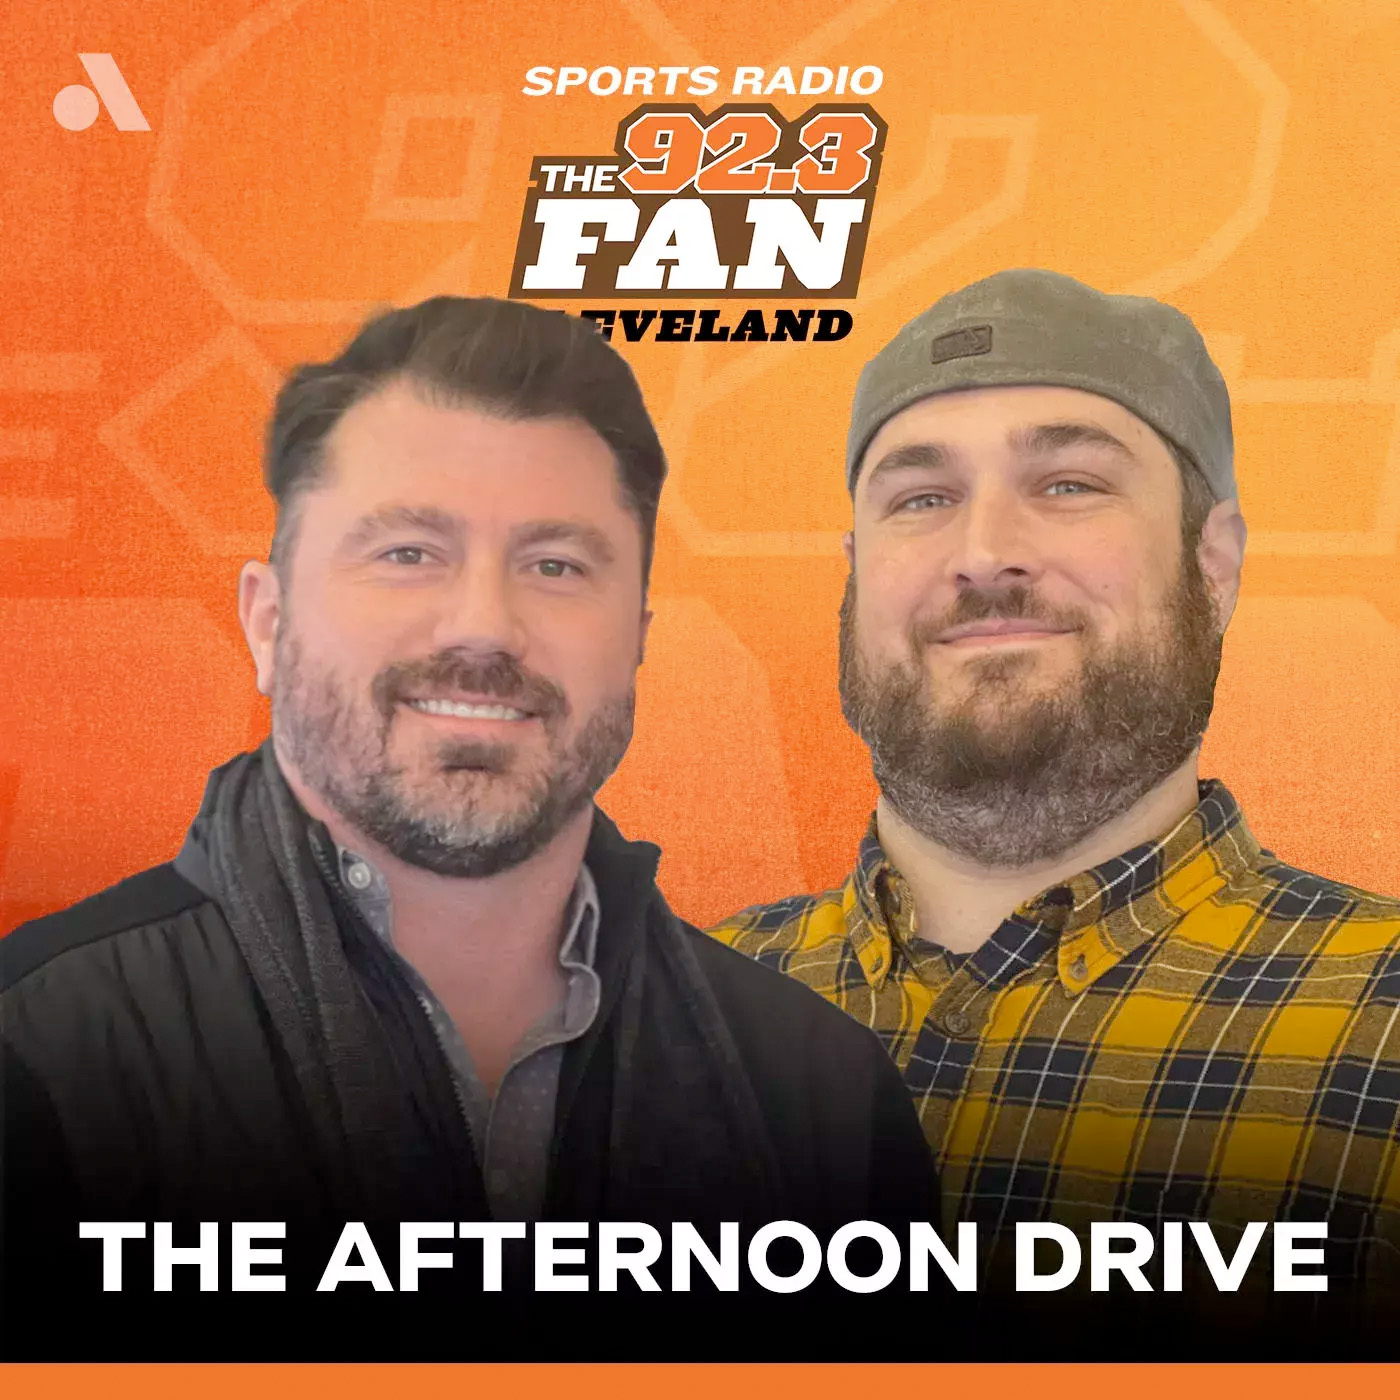 Nathan Zegura says Browns’ win could be season defining for Stefanski; optimism Watson could be back against Colts